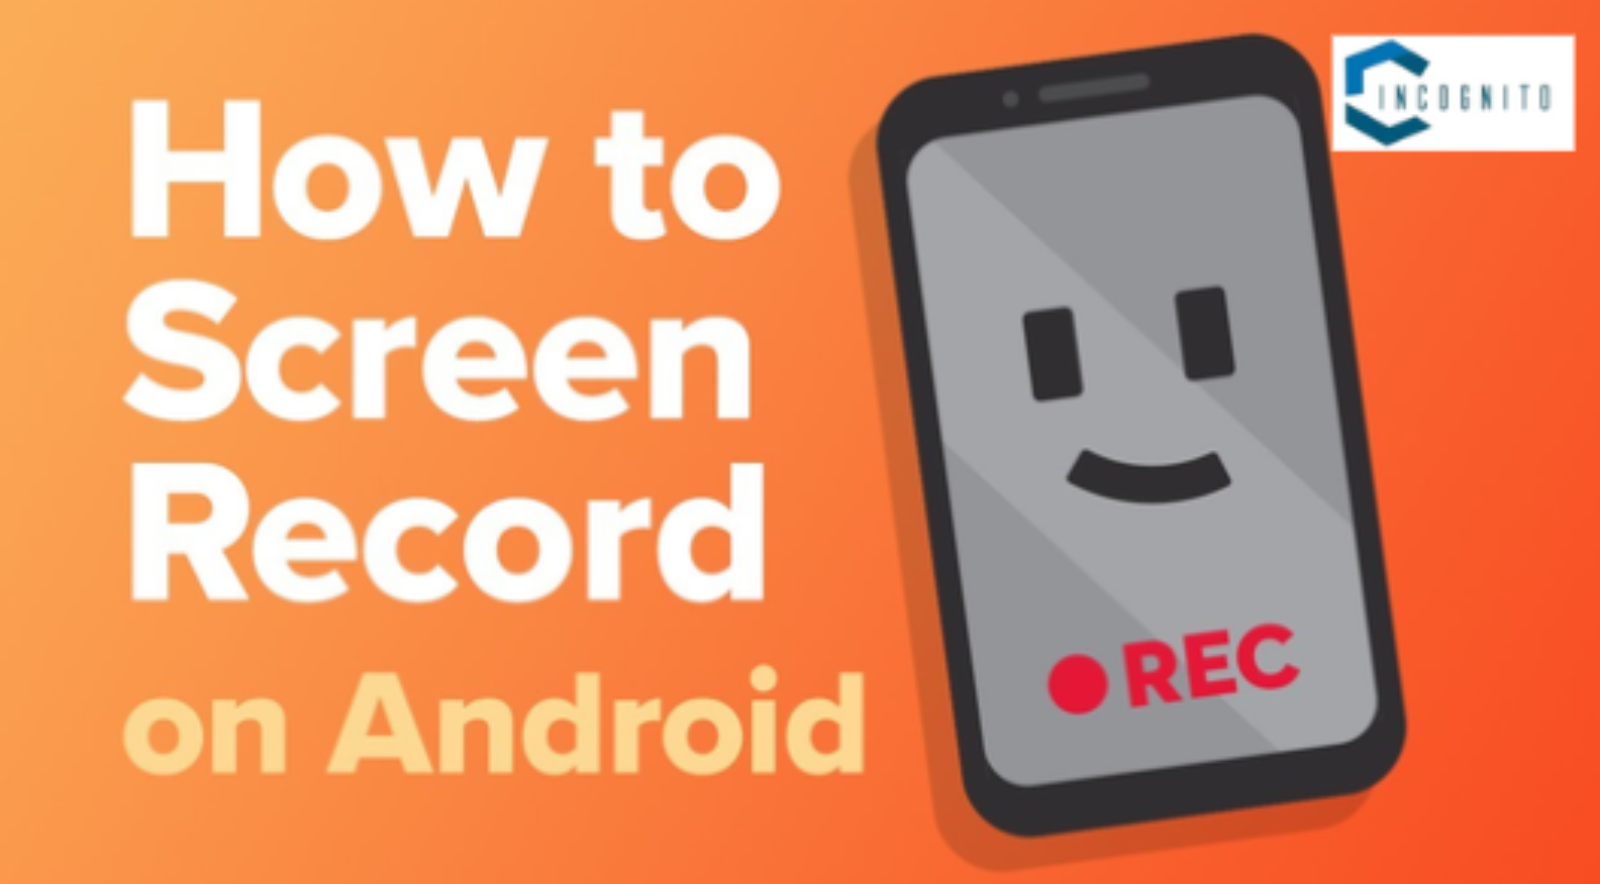 How to Screen Record on Android